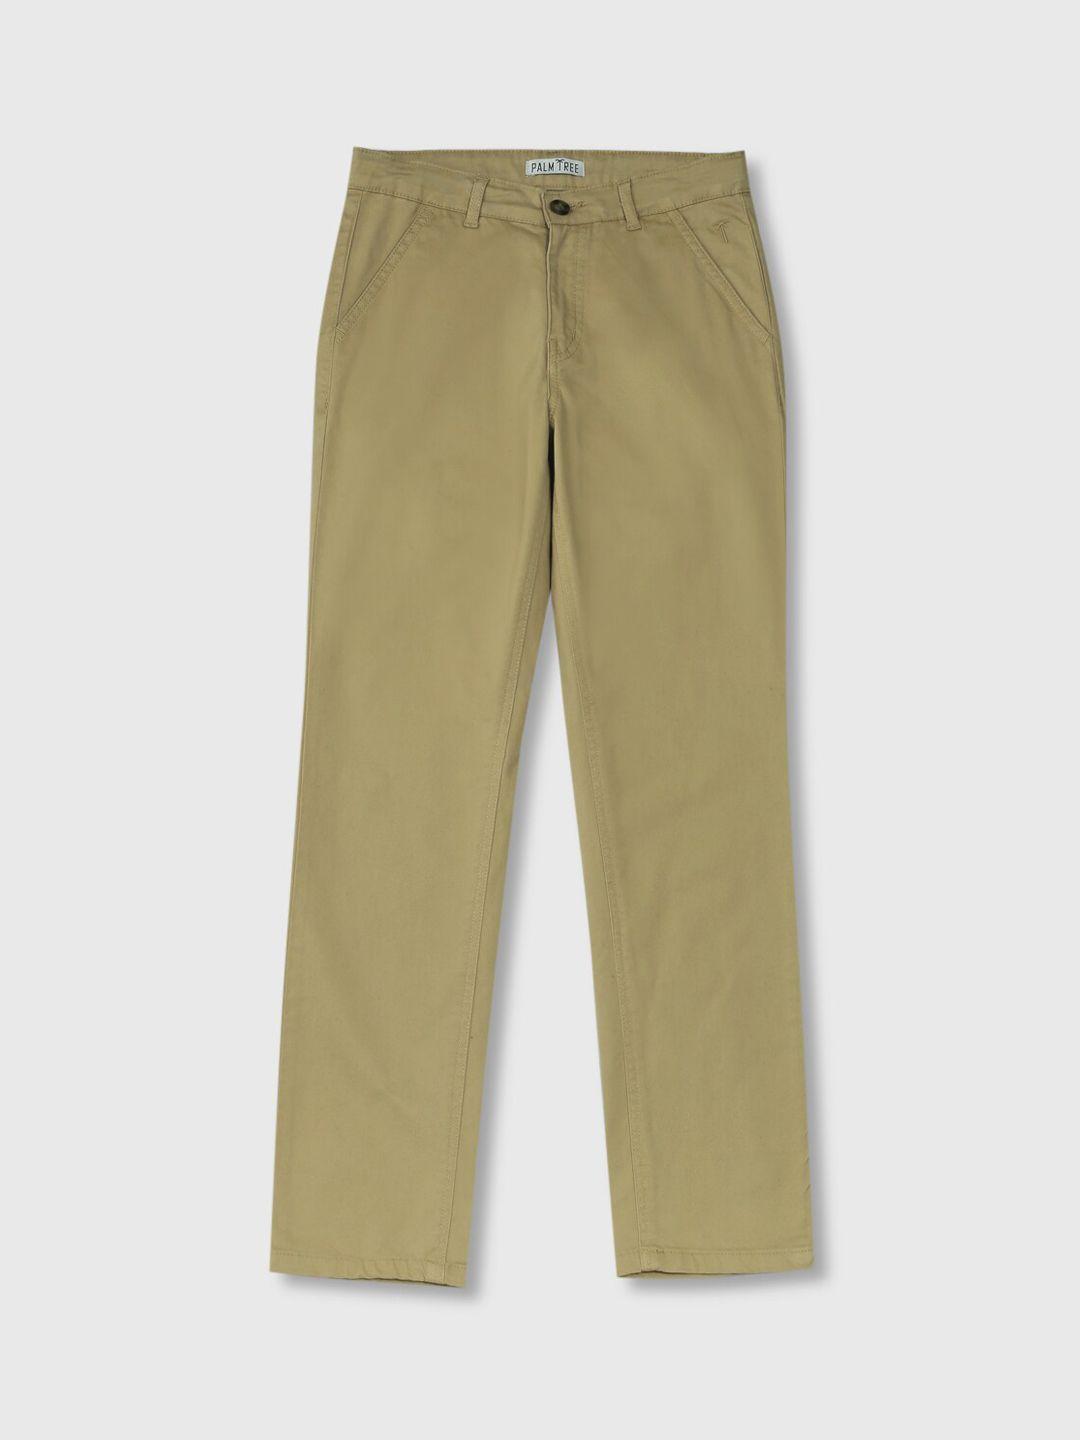 palm-tree-boys-mid-rise-cotton-chinos-trousers